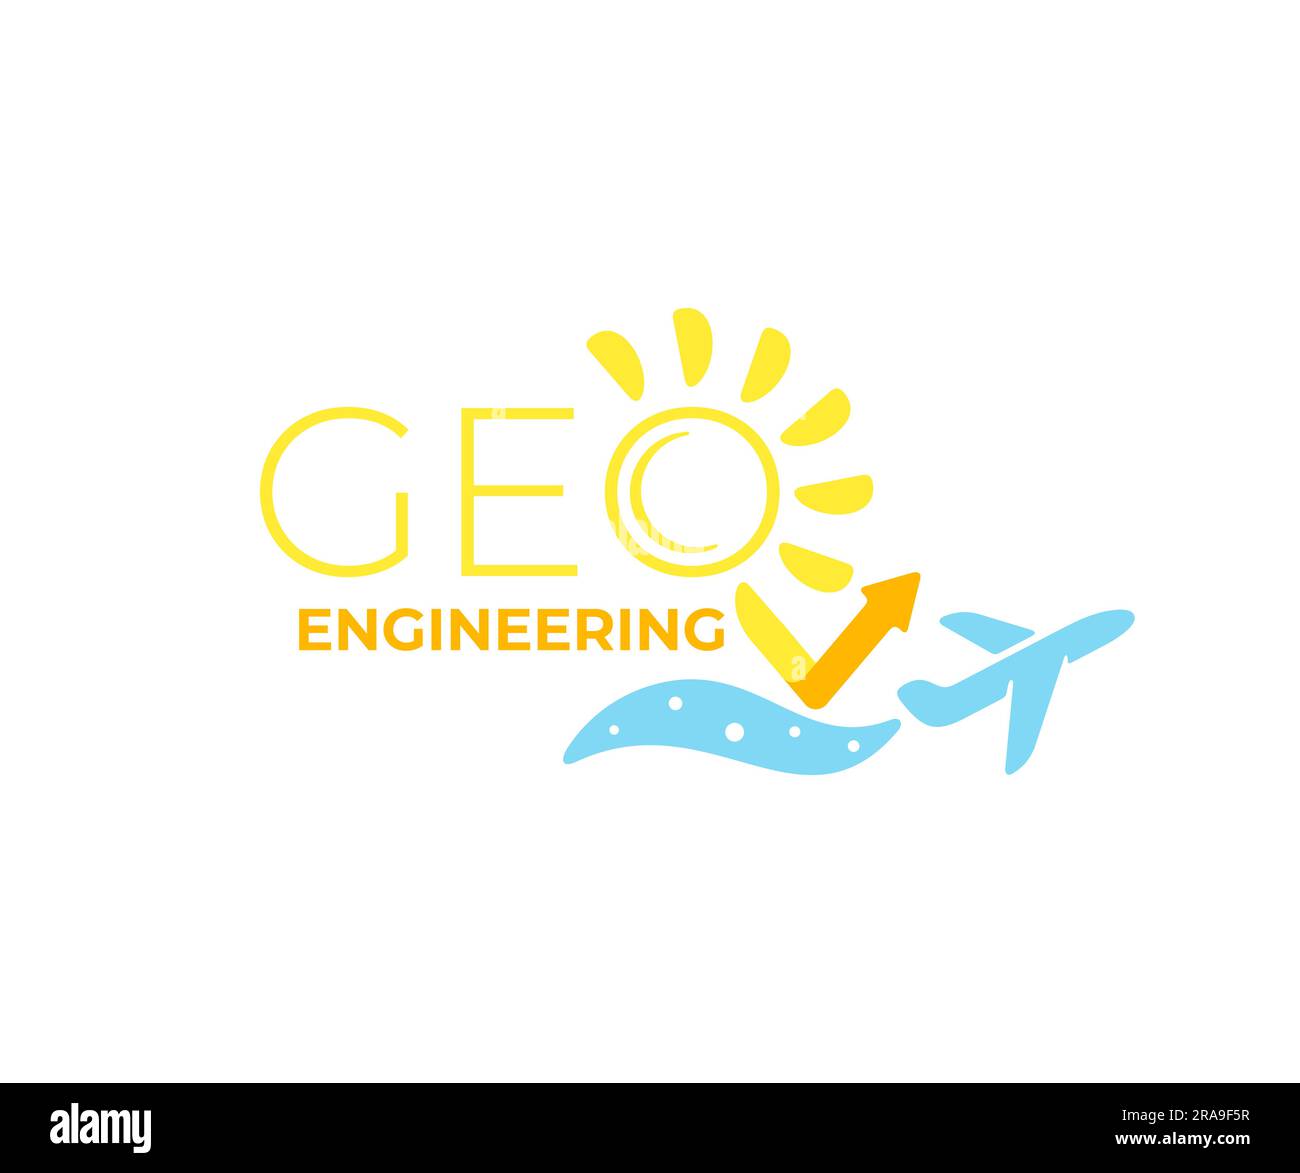 Geoengineering, plane sprays small particles that reflect solar energy, graphic design. Environmental, environment, ecology, earth's climate Stock Vector